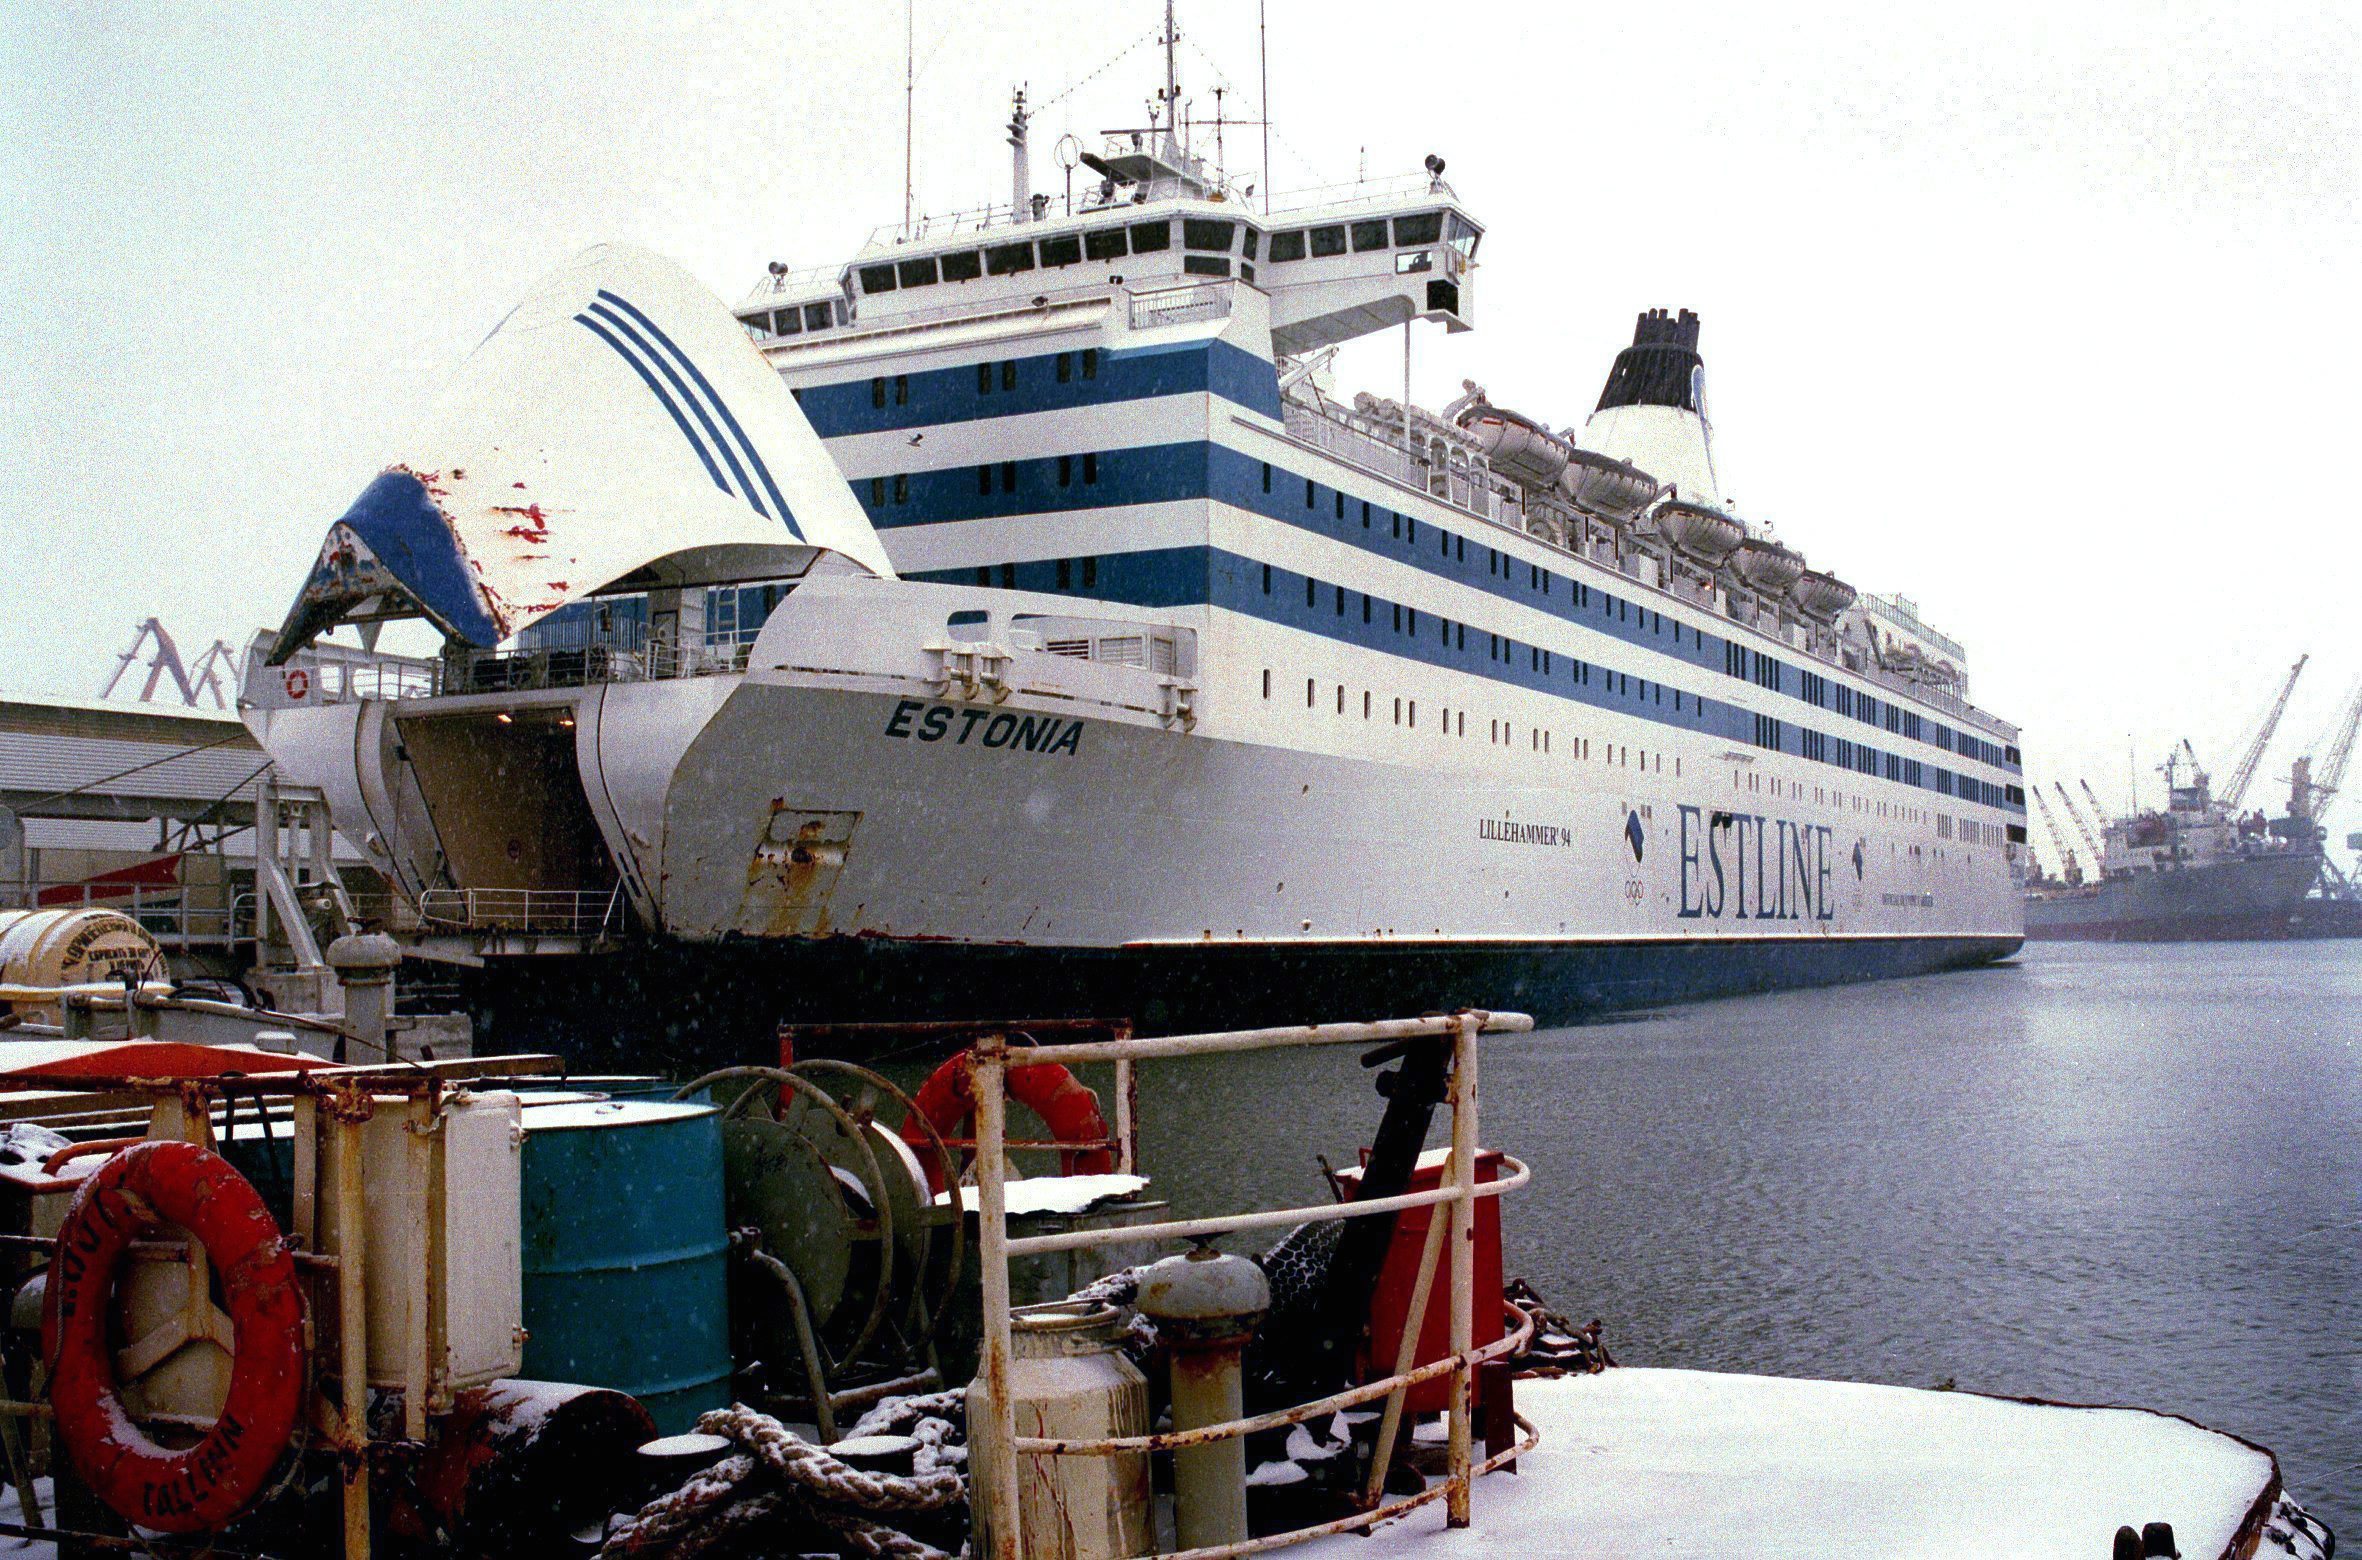 The M / S Estonia disaster TV series is planned, the most expensive drama of all time in Finland